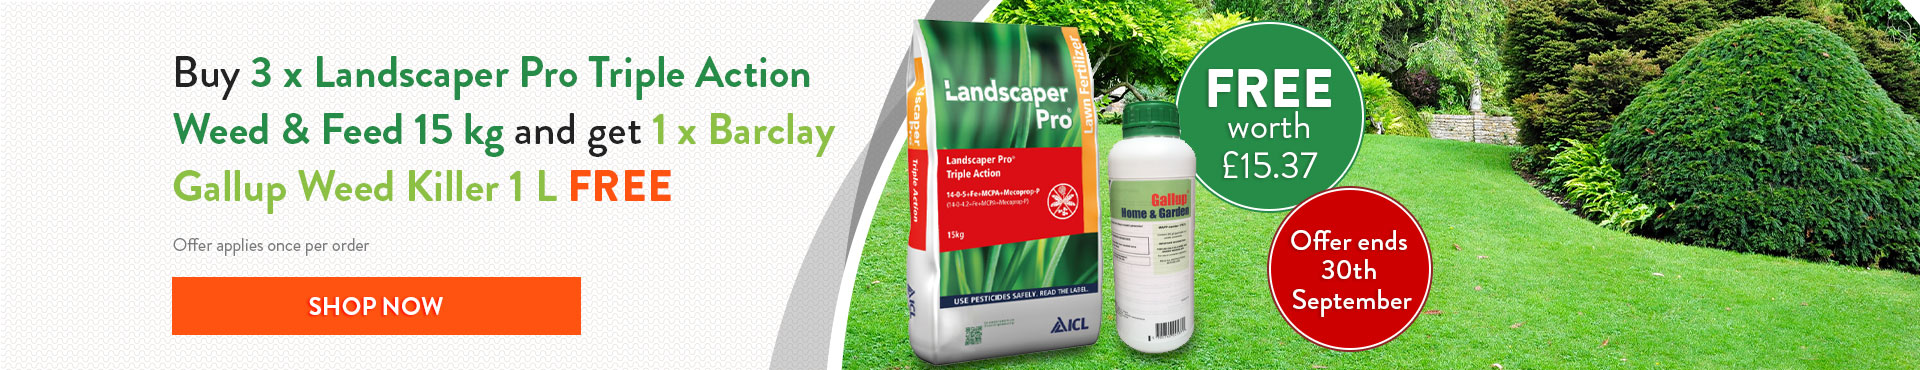 Landscaper Pro and Gallup 1 L offer - Pitchcare Shop